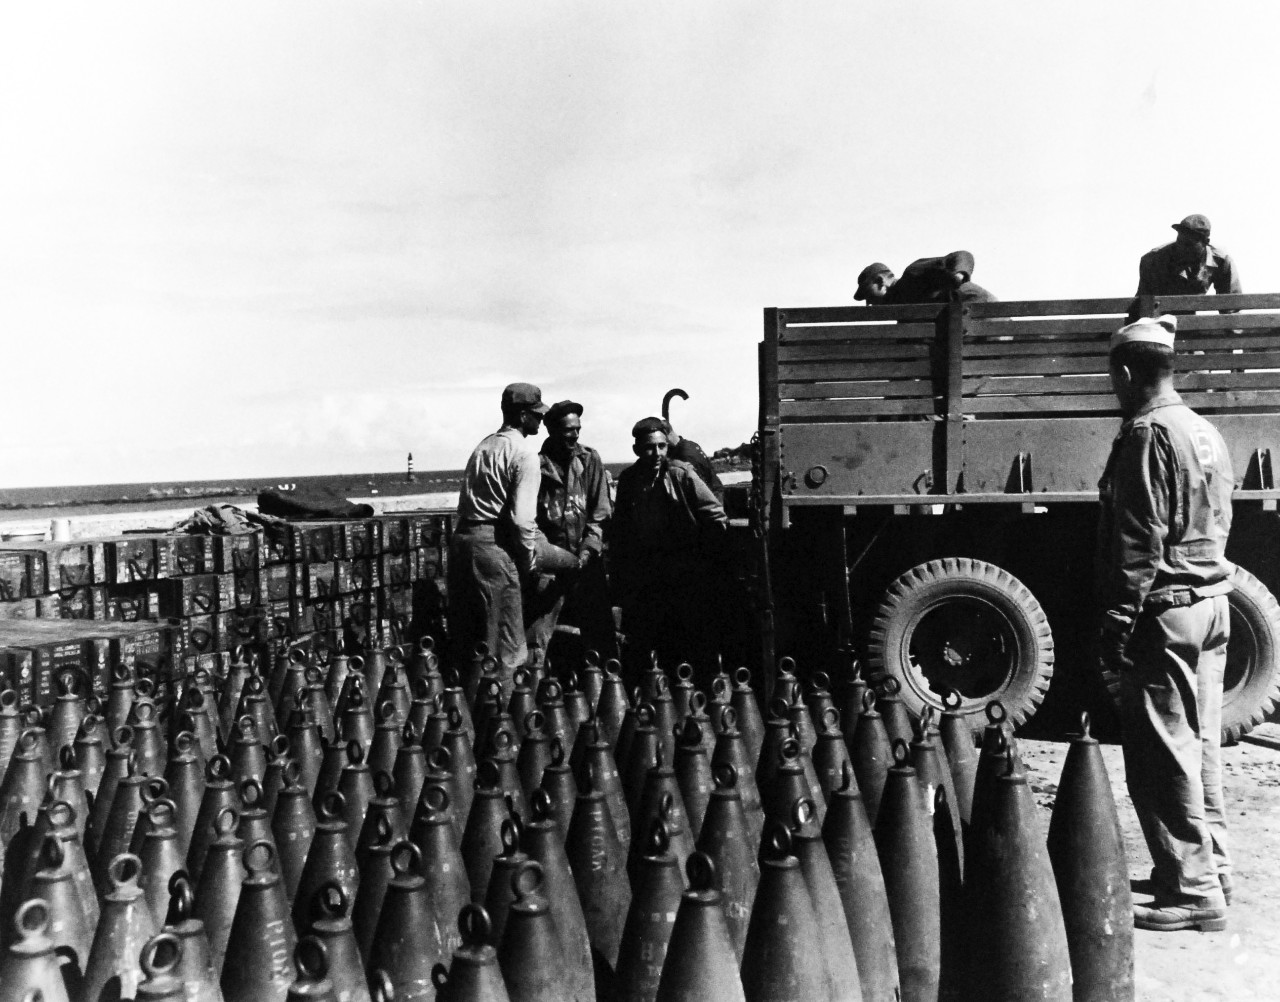 80-G-247135:   Invasion of France, Roscoff, August-September 1944.    US Navy Seabees loading ammunition at Roscoff, France, for battle of Brest.   Note 155MM Shells.  Photograph received September 1944.   Official U.S. Navy Photograph, now in the collections of the National Archives.   (2014/3/12).  